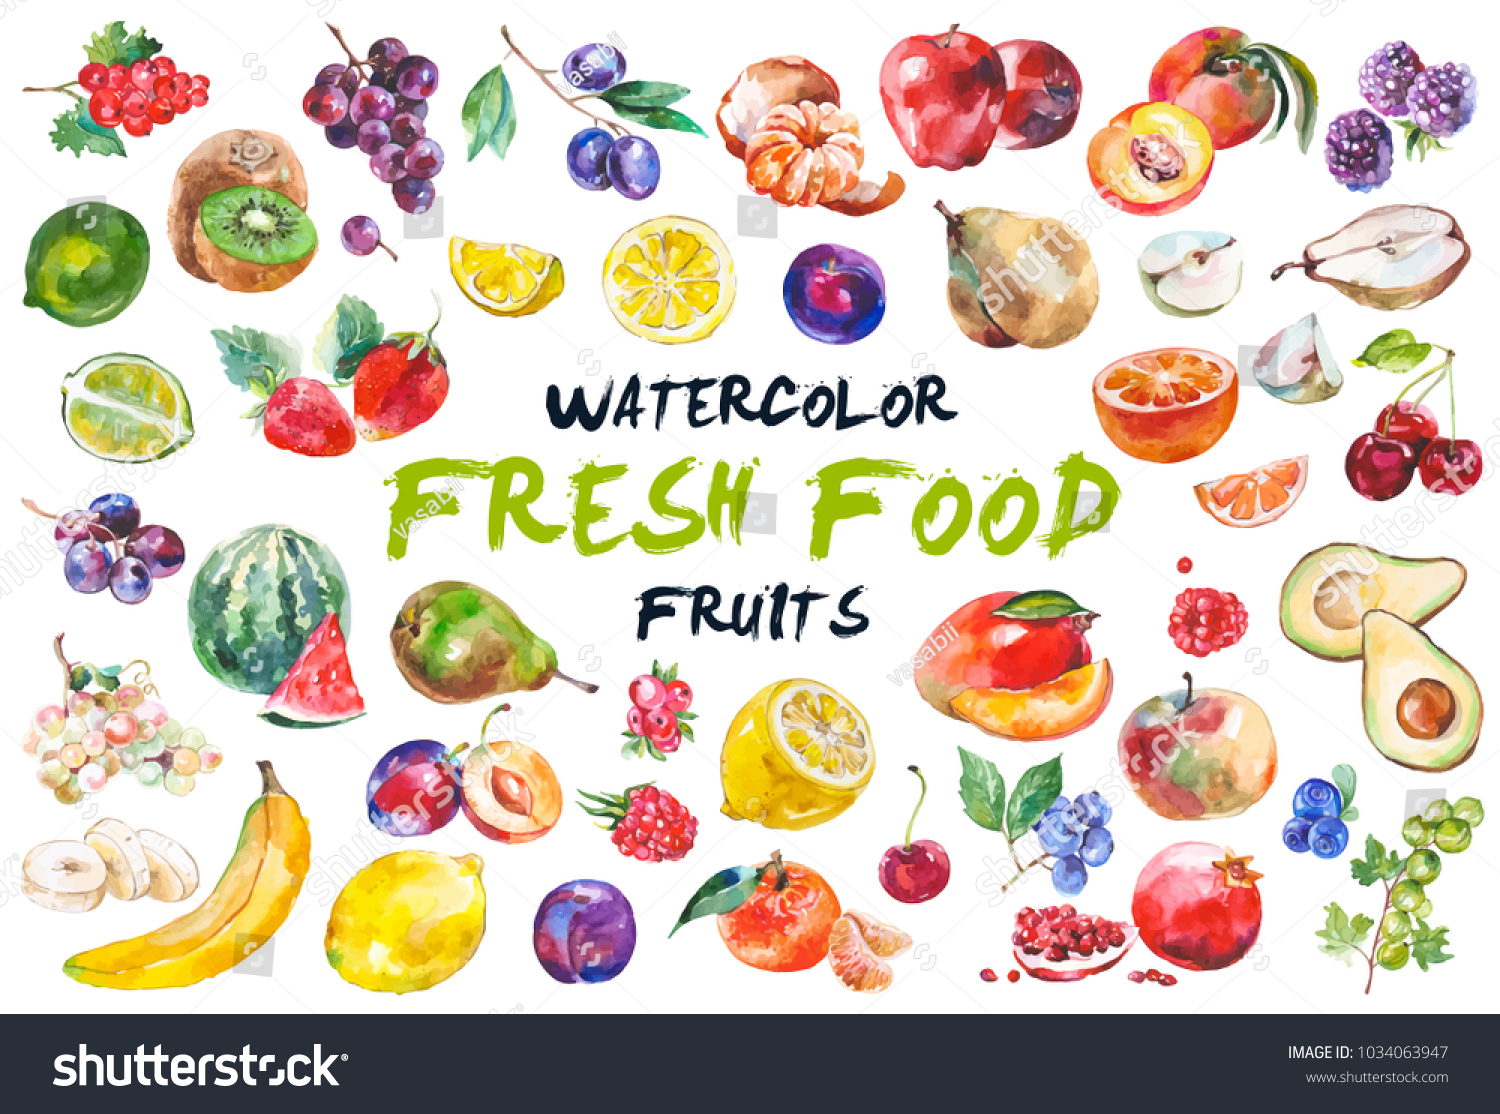 Watercolor painted collection of fruits. Hand drawn fresh food design elements isolated on white background. #1034063947